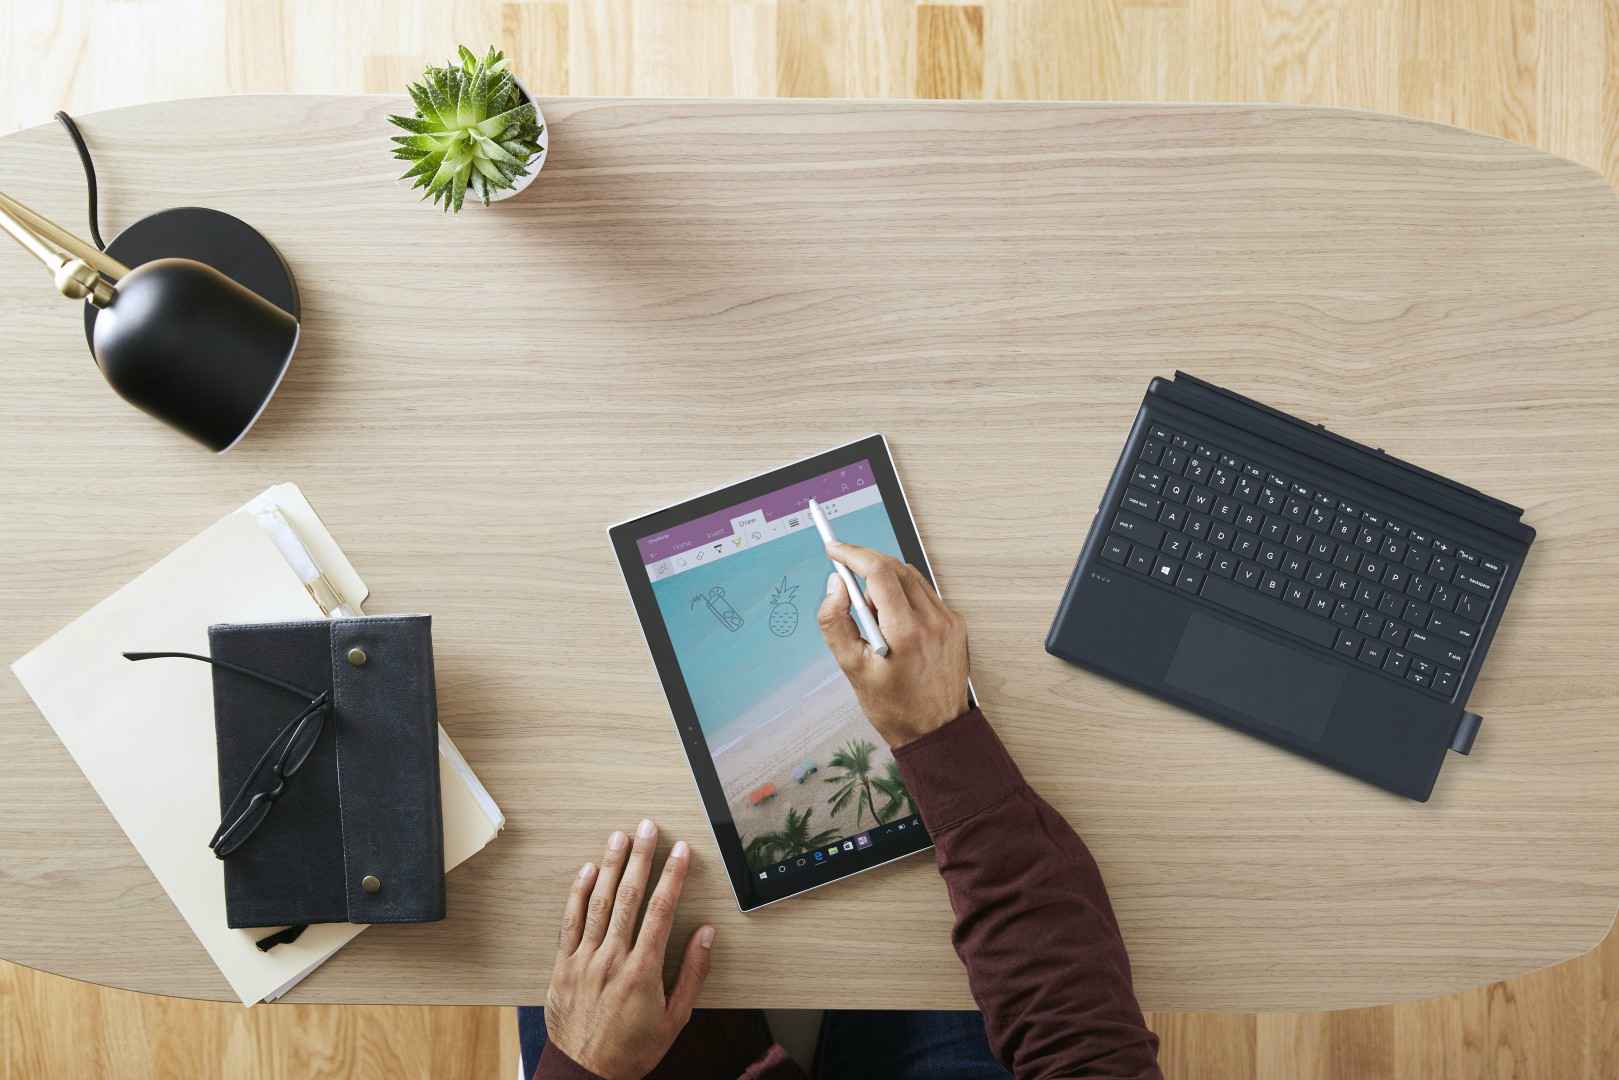 HP Envy X2 with snapdragon 835